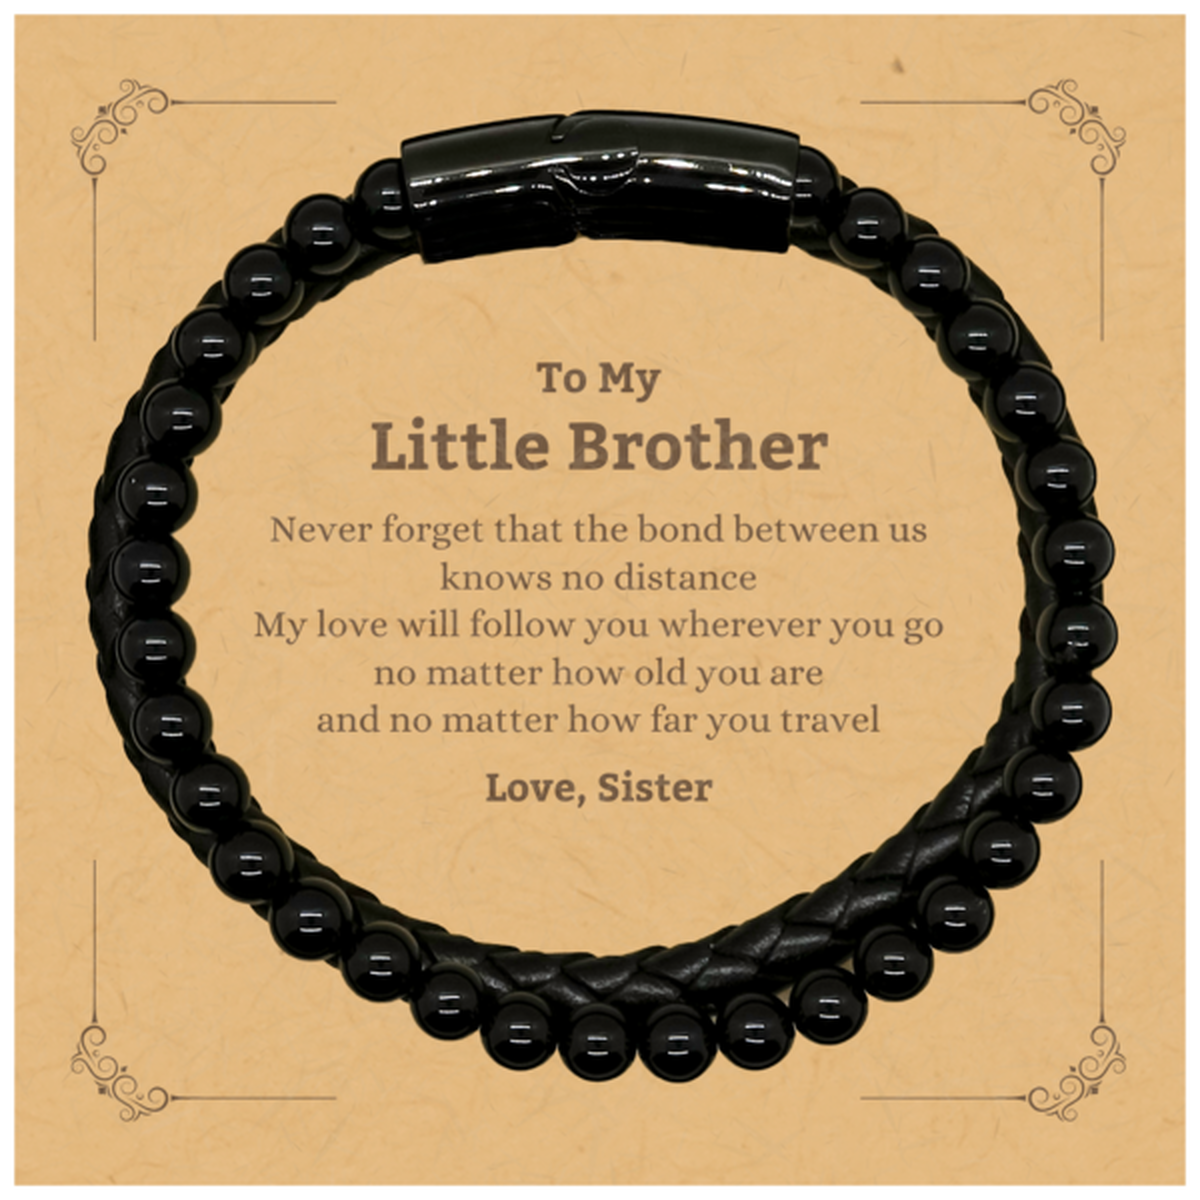 Little Brother Birthday Gifts from Sister, Adjustable Stone Leather Bracelets for Little Brother Christmas Graduation Unique Gifts Little Brother Never forget that the bond between us knows no distance. Love, Sister